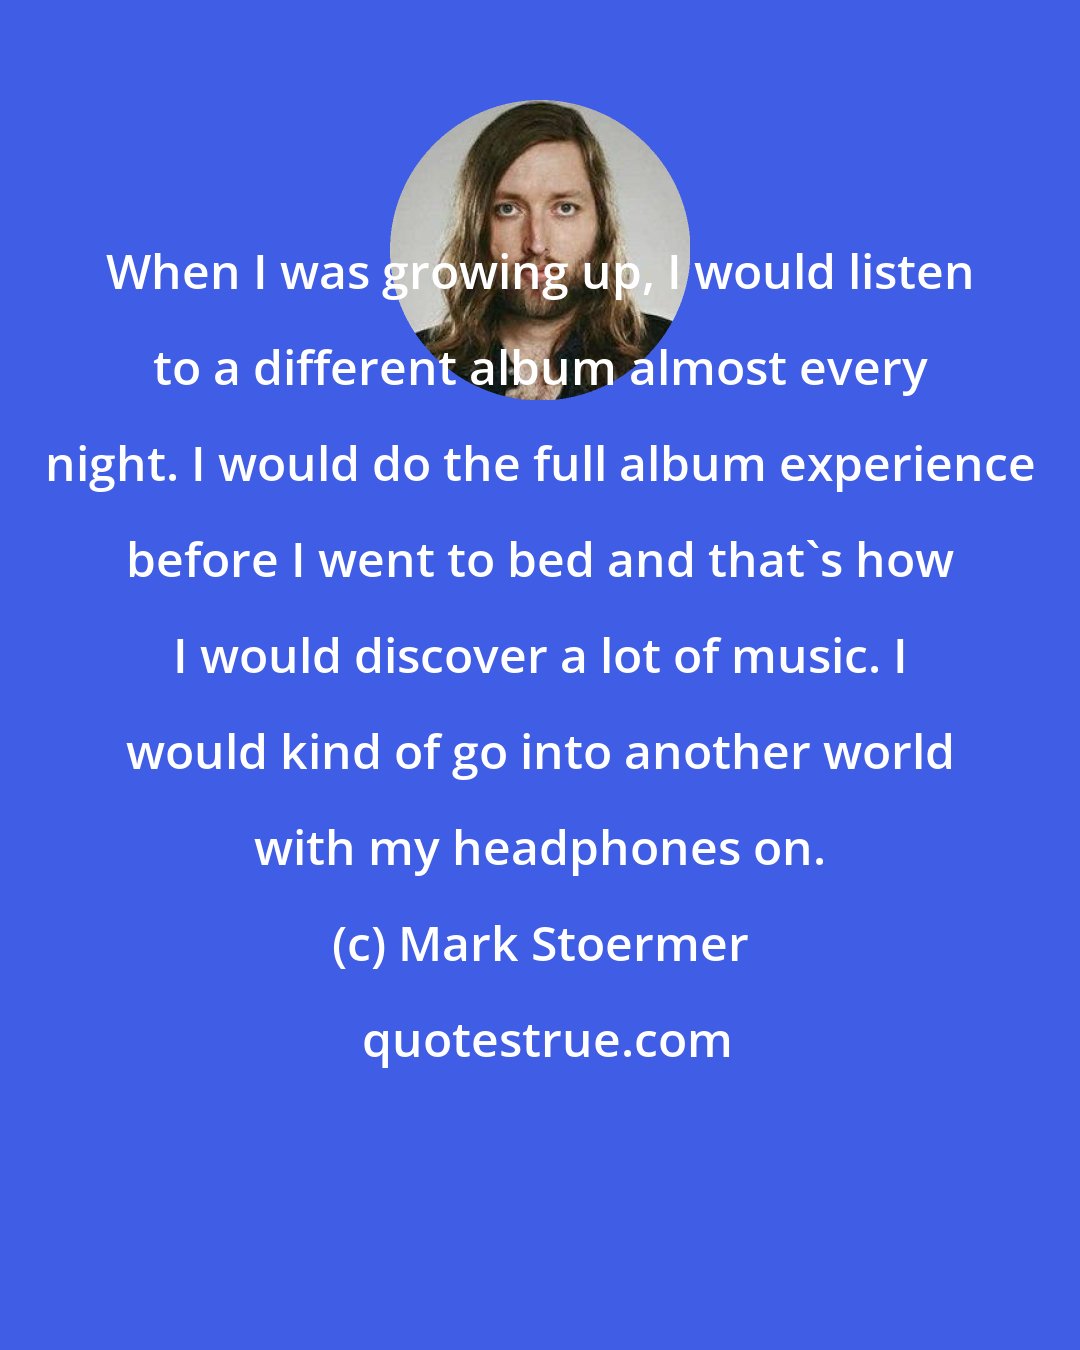 Mark Stoermer: When I was growing up, I would listen to a different album almost every night. I would do the full album experience before I went to bed and that's how I would discover a lot of music. I would kind of go into another world with my headphones on.